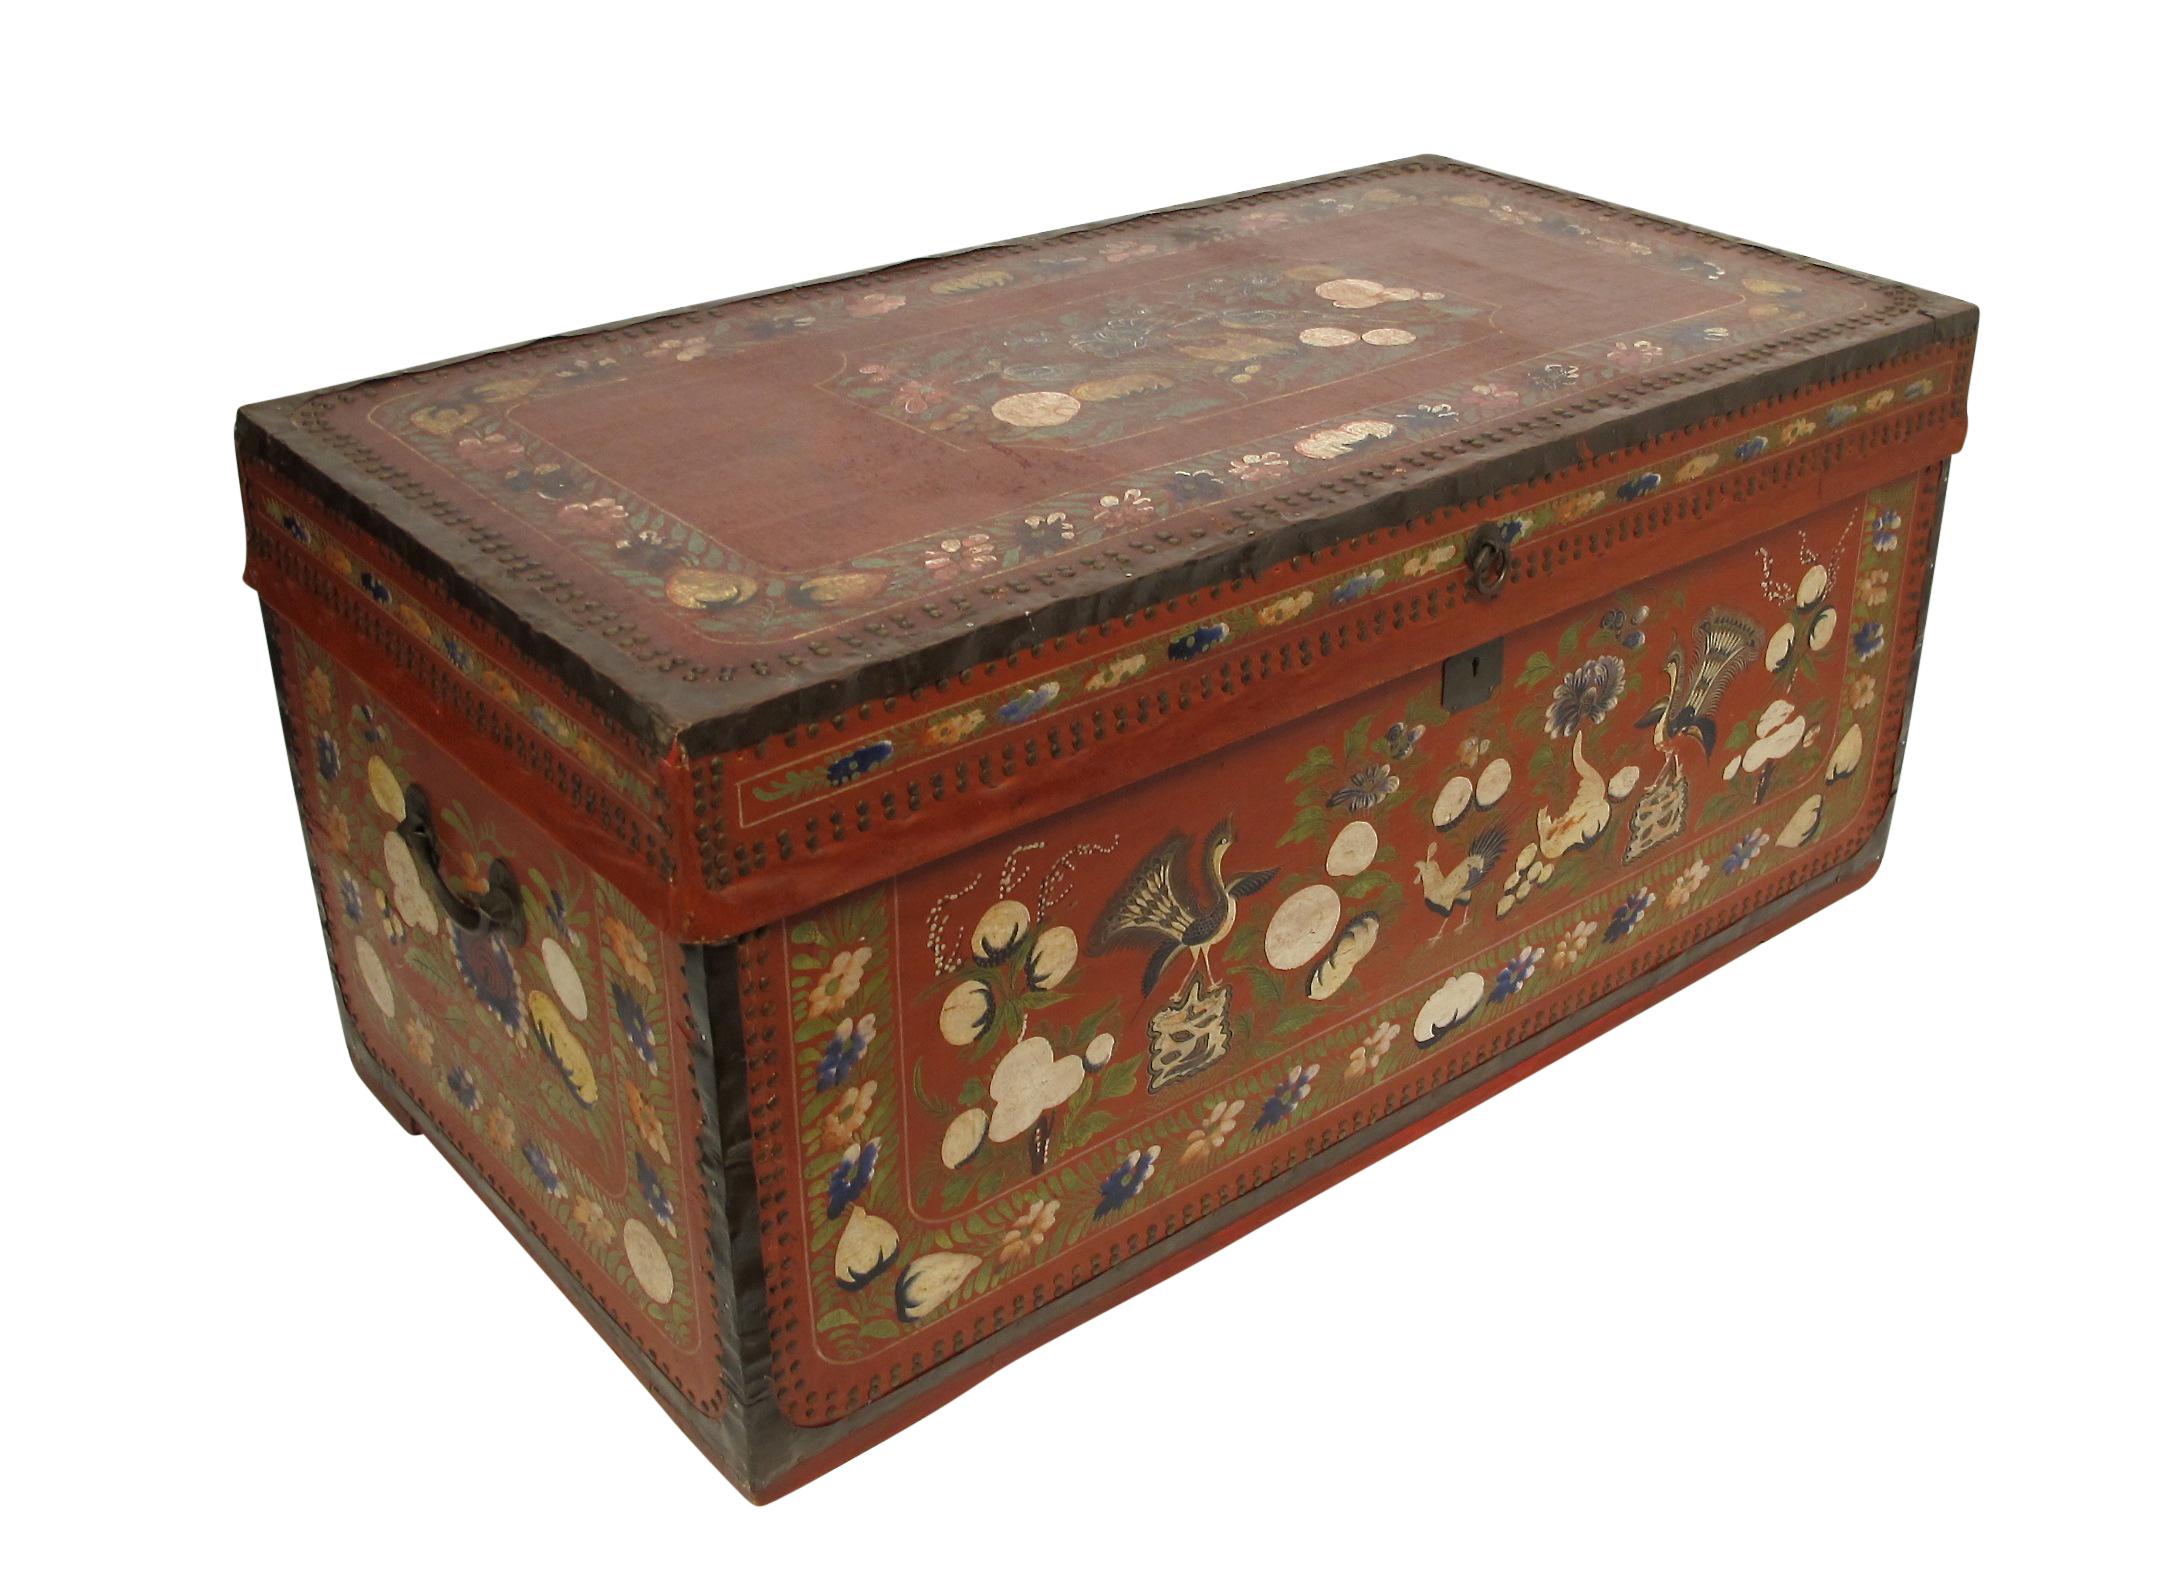 A red pig skin leather trunk with hand-painted floral decoration and having nailhead trim. China, mid-19th century.